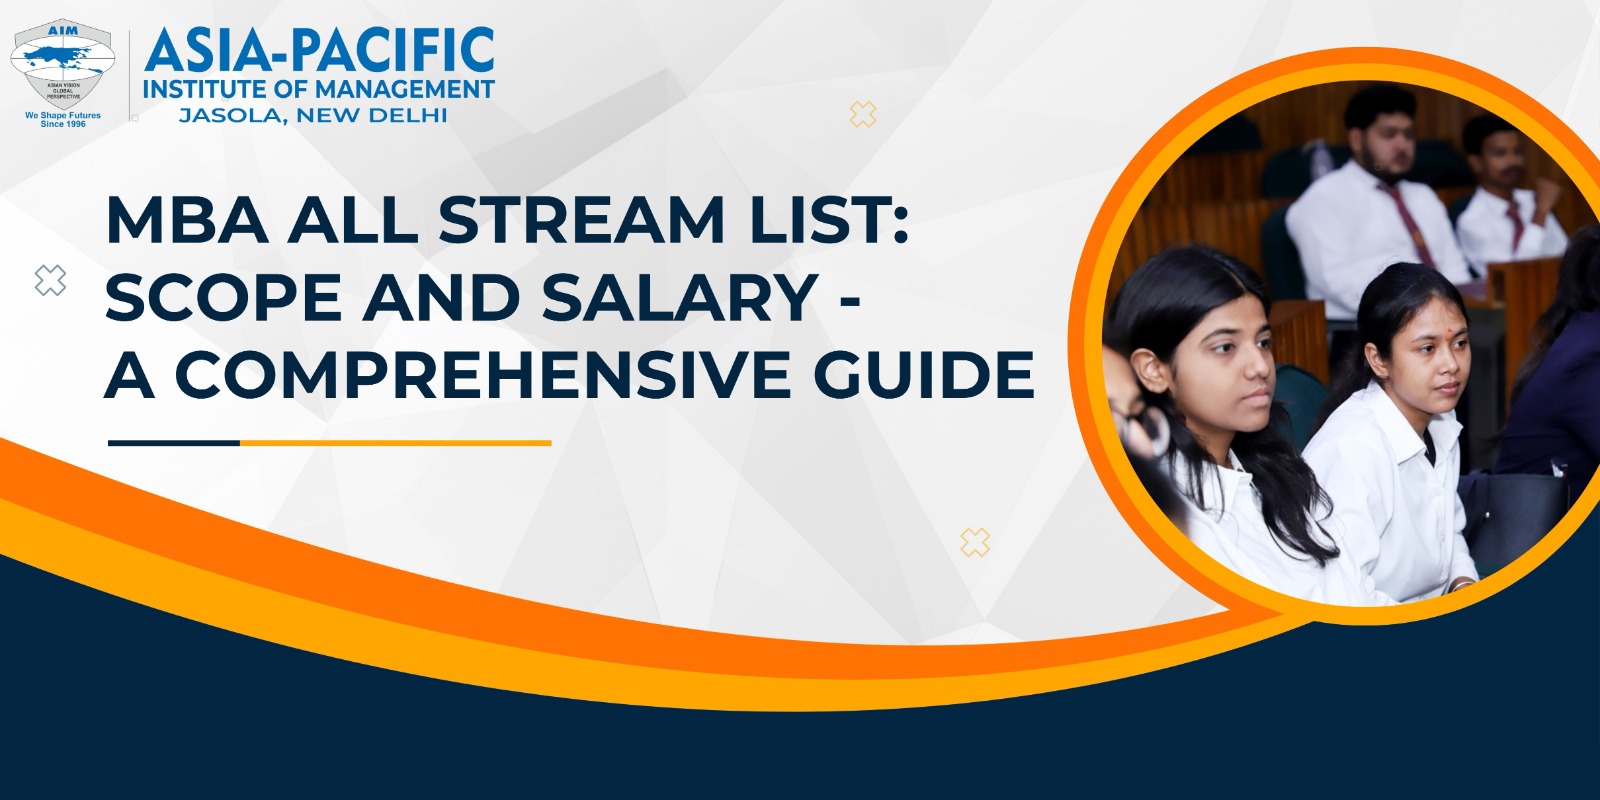 MBA All Stream List: Scope and Salary - A Comprehensive Guide